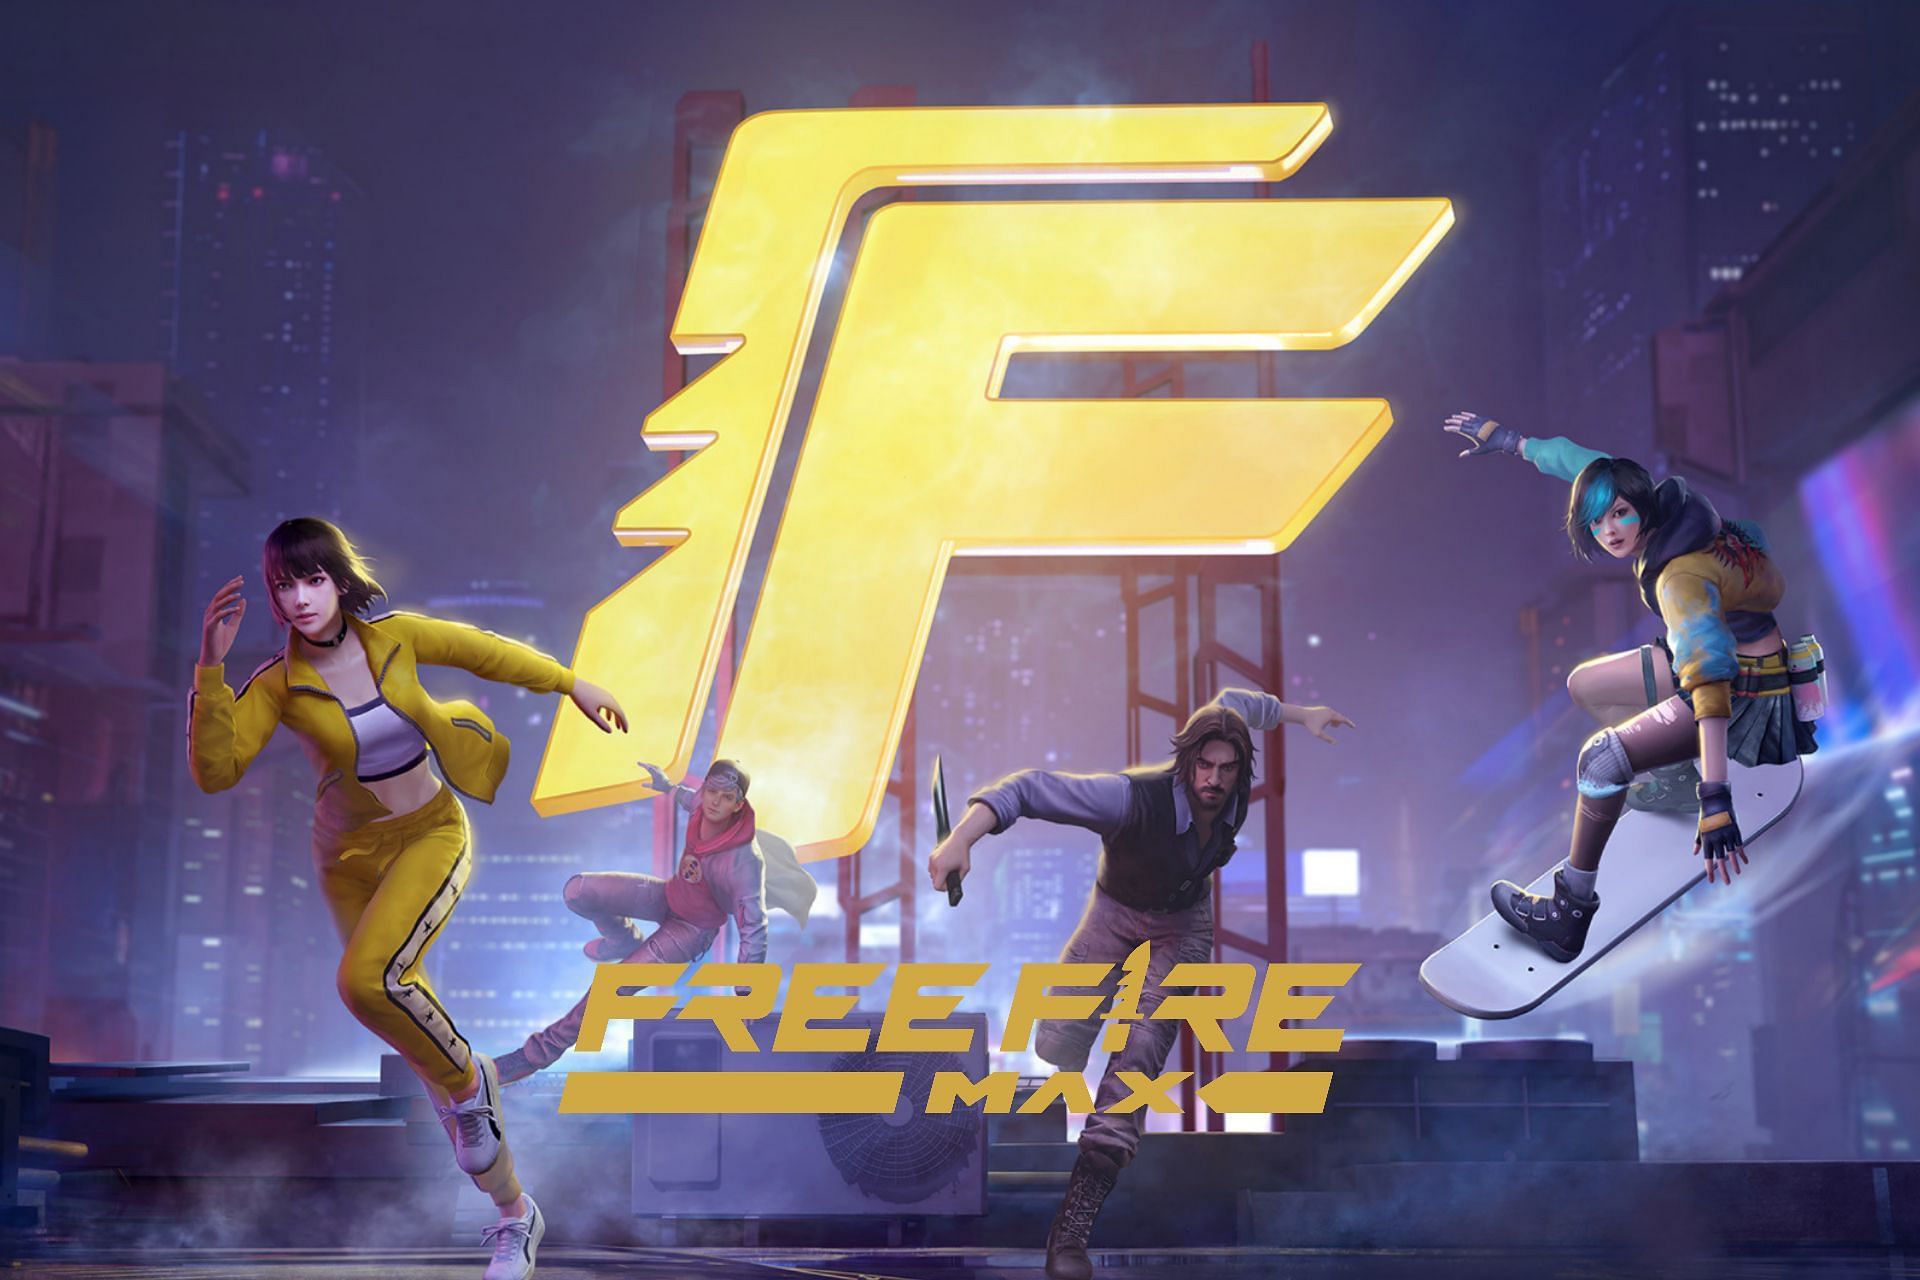 Publishers tease new Free Fire MAX announcement for the fans (Image via Garena)